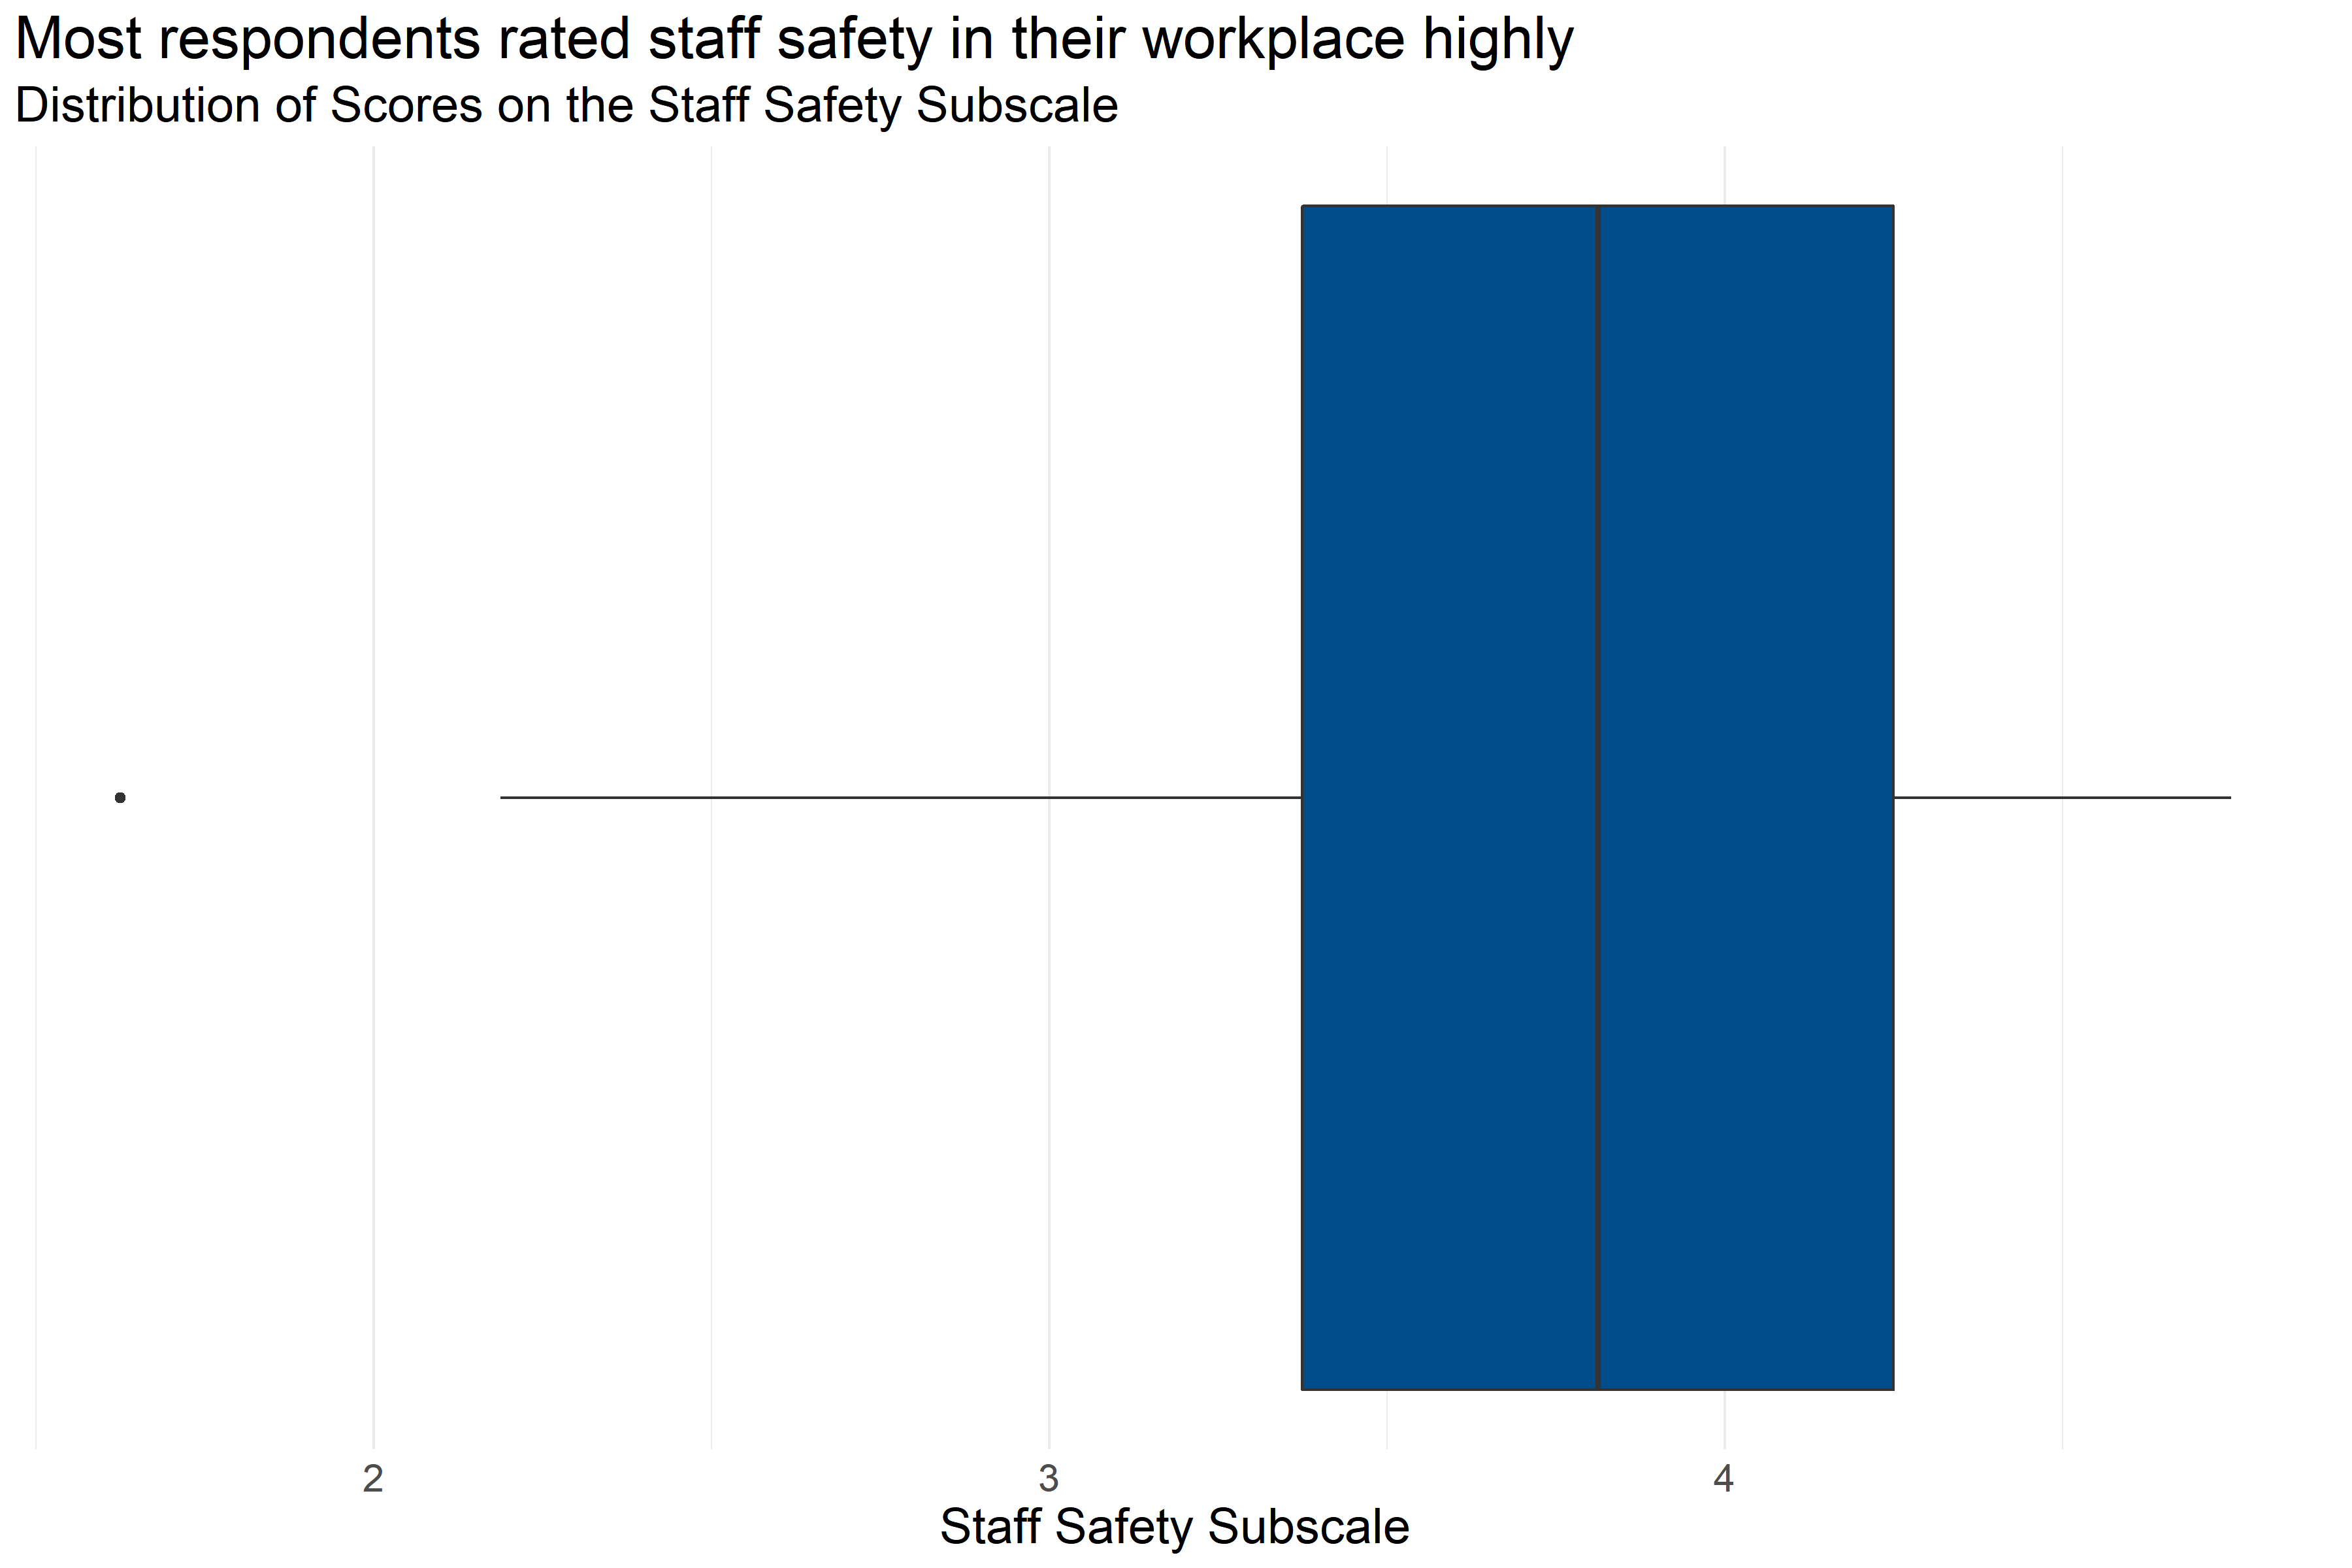 Boxplot of score distributions for Staff Safety Subscale